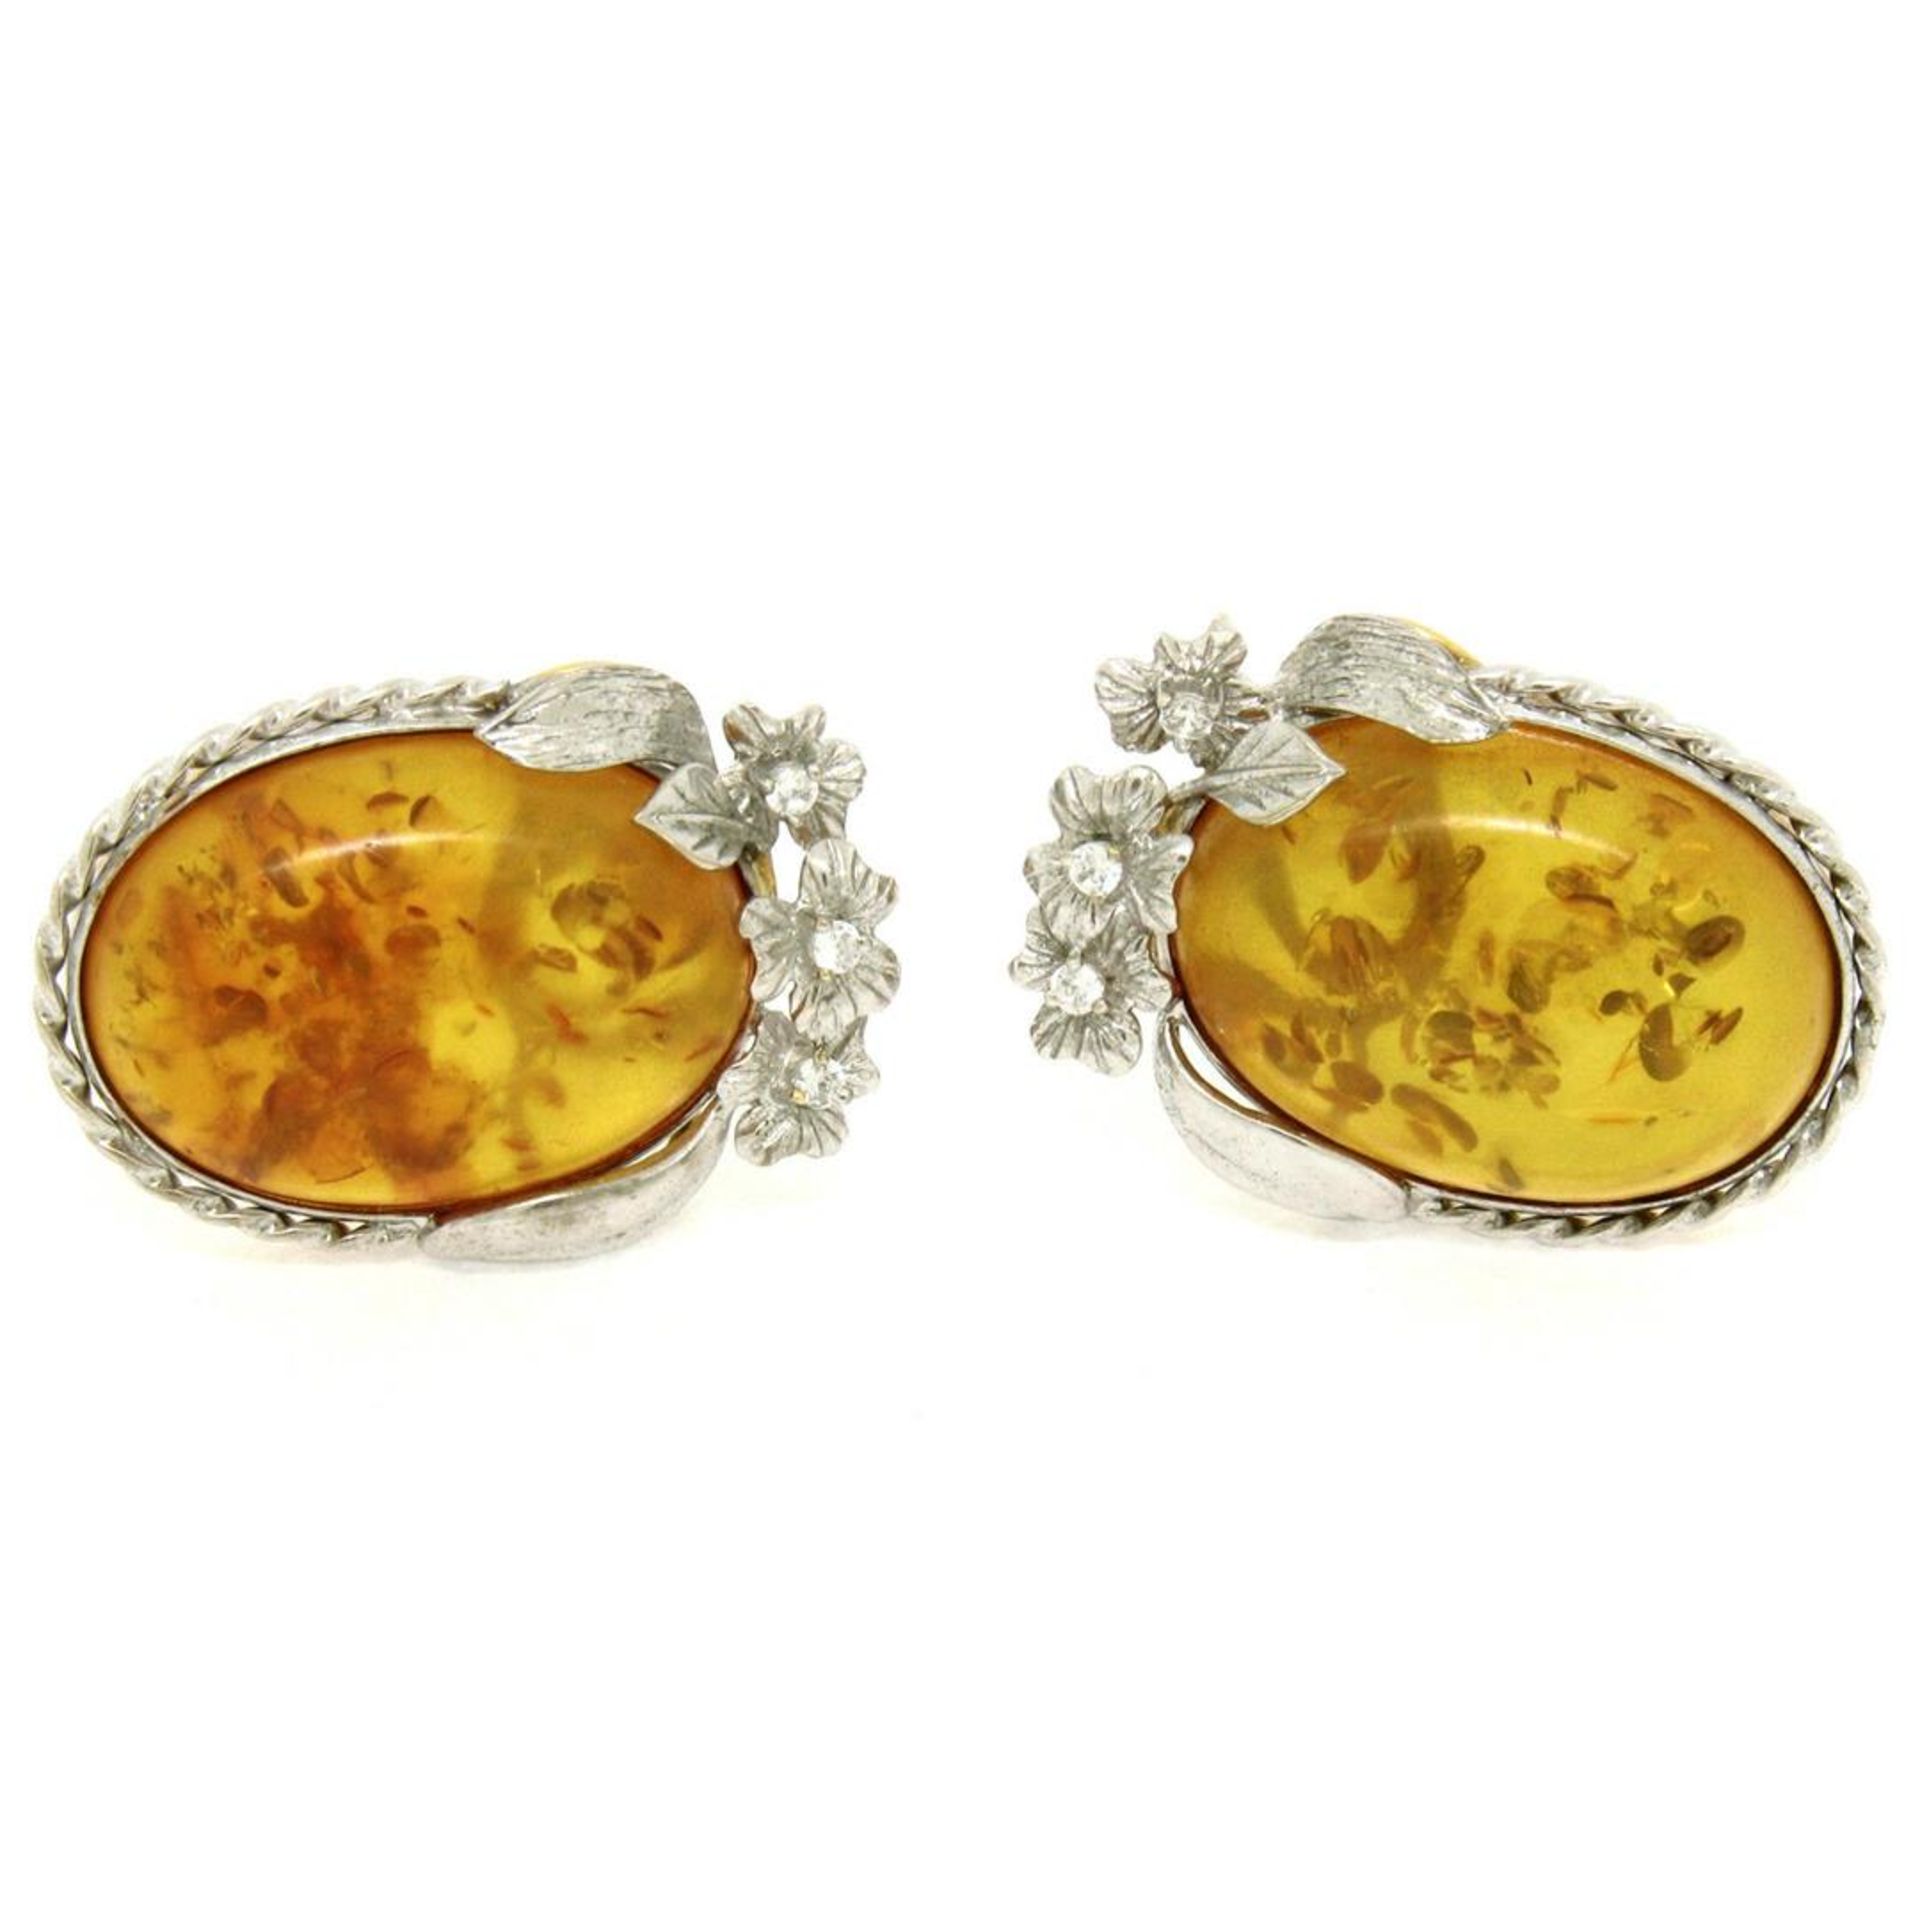 Vintage 18k White Gold Large Oval Amber Diamond Omega Earrings w/ Flower Etching - Image 3 of 6